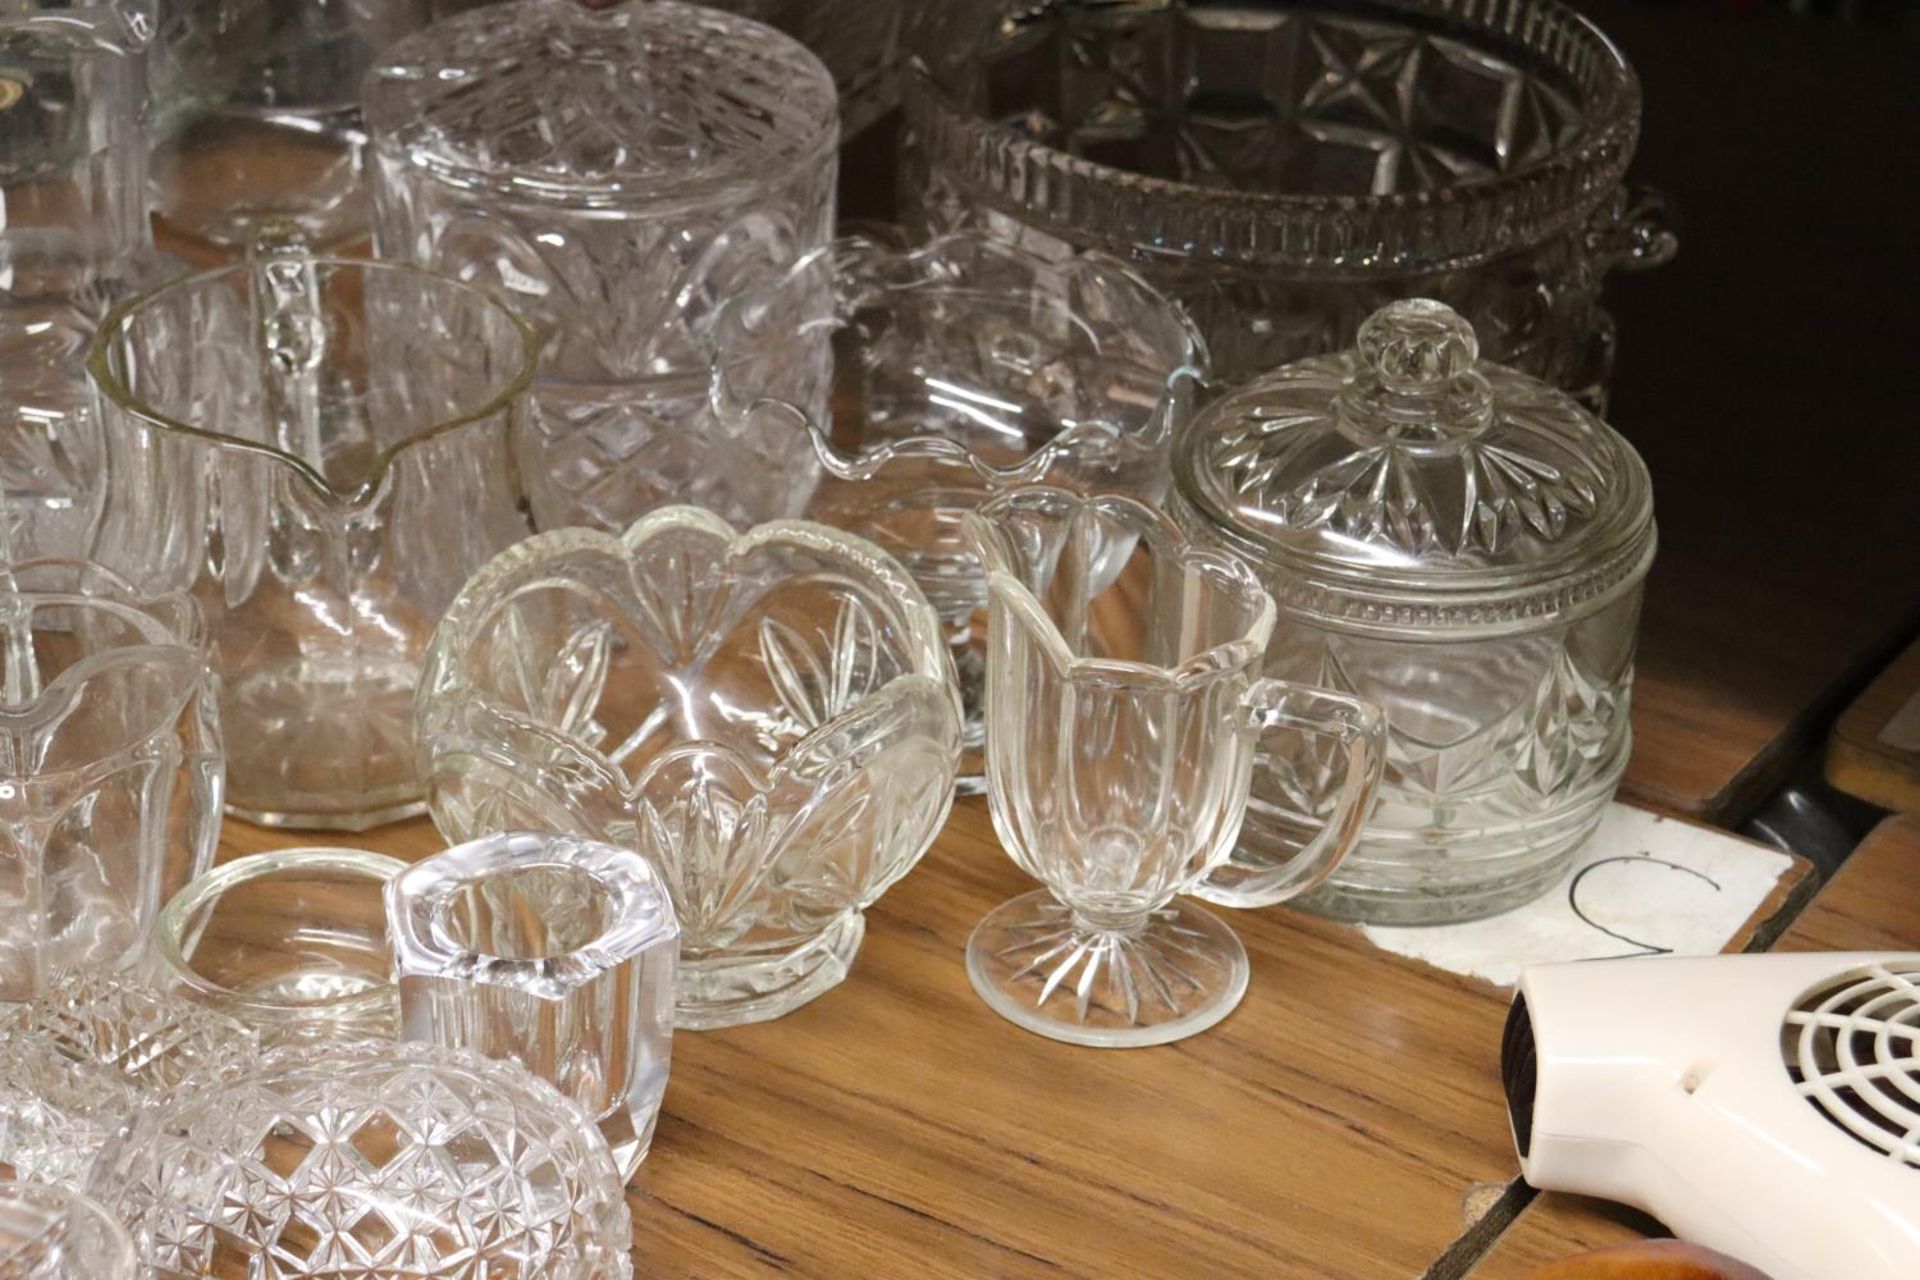 A LARGE QUANTITY OF GLASSWARE TO INCLUDE BOWLS, JUGS, LIDDED CONTAINERS, ETC - Image 3 of 5